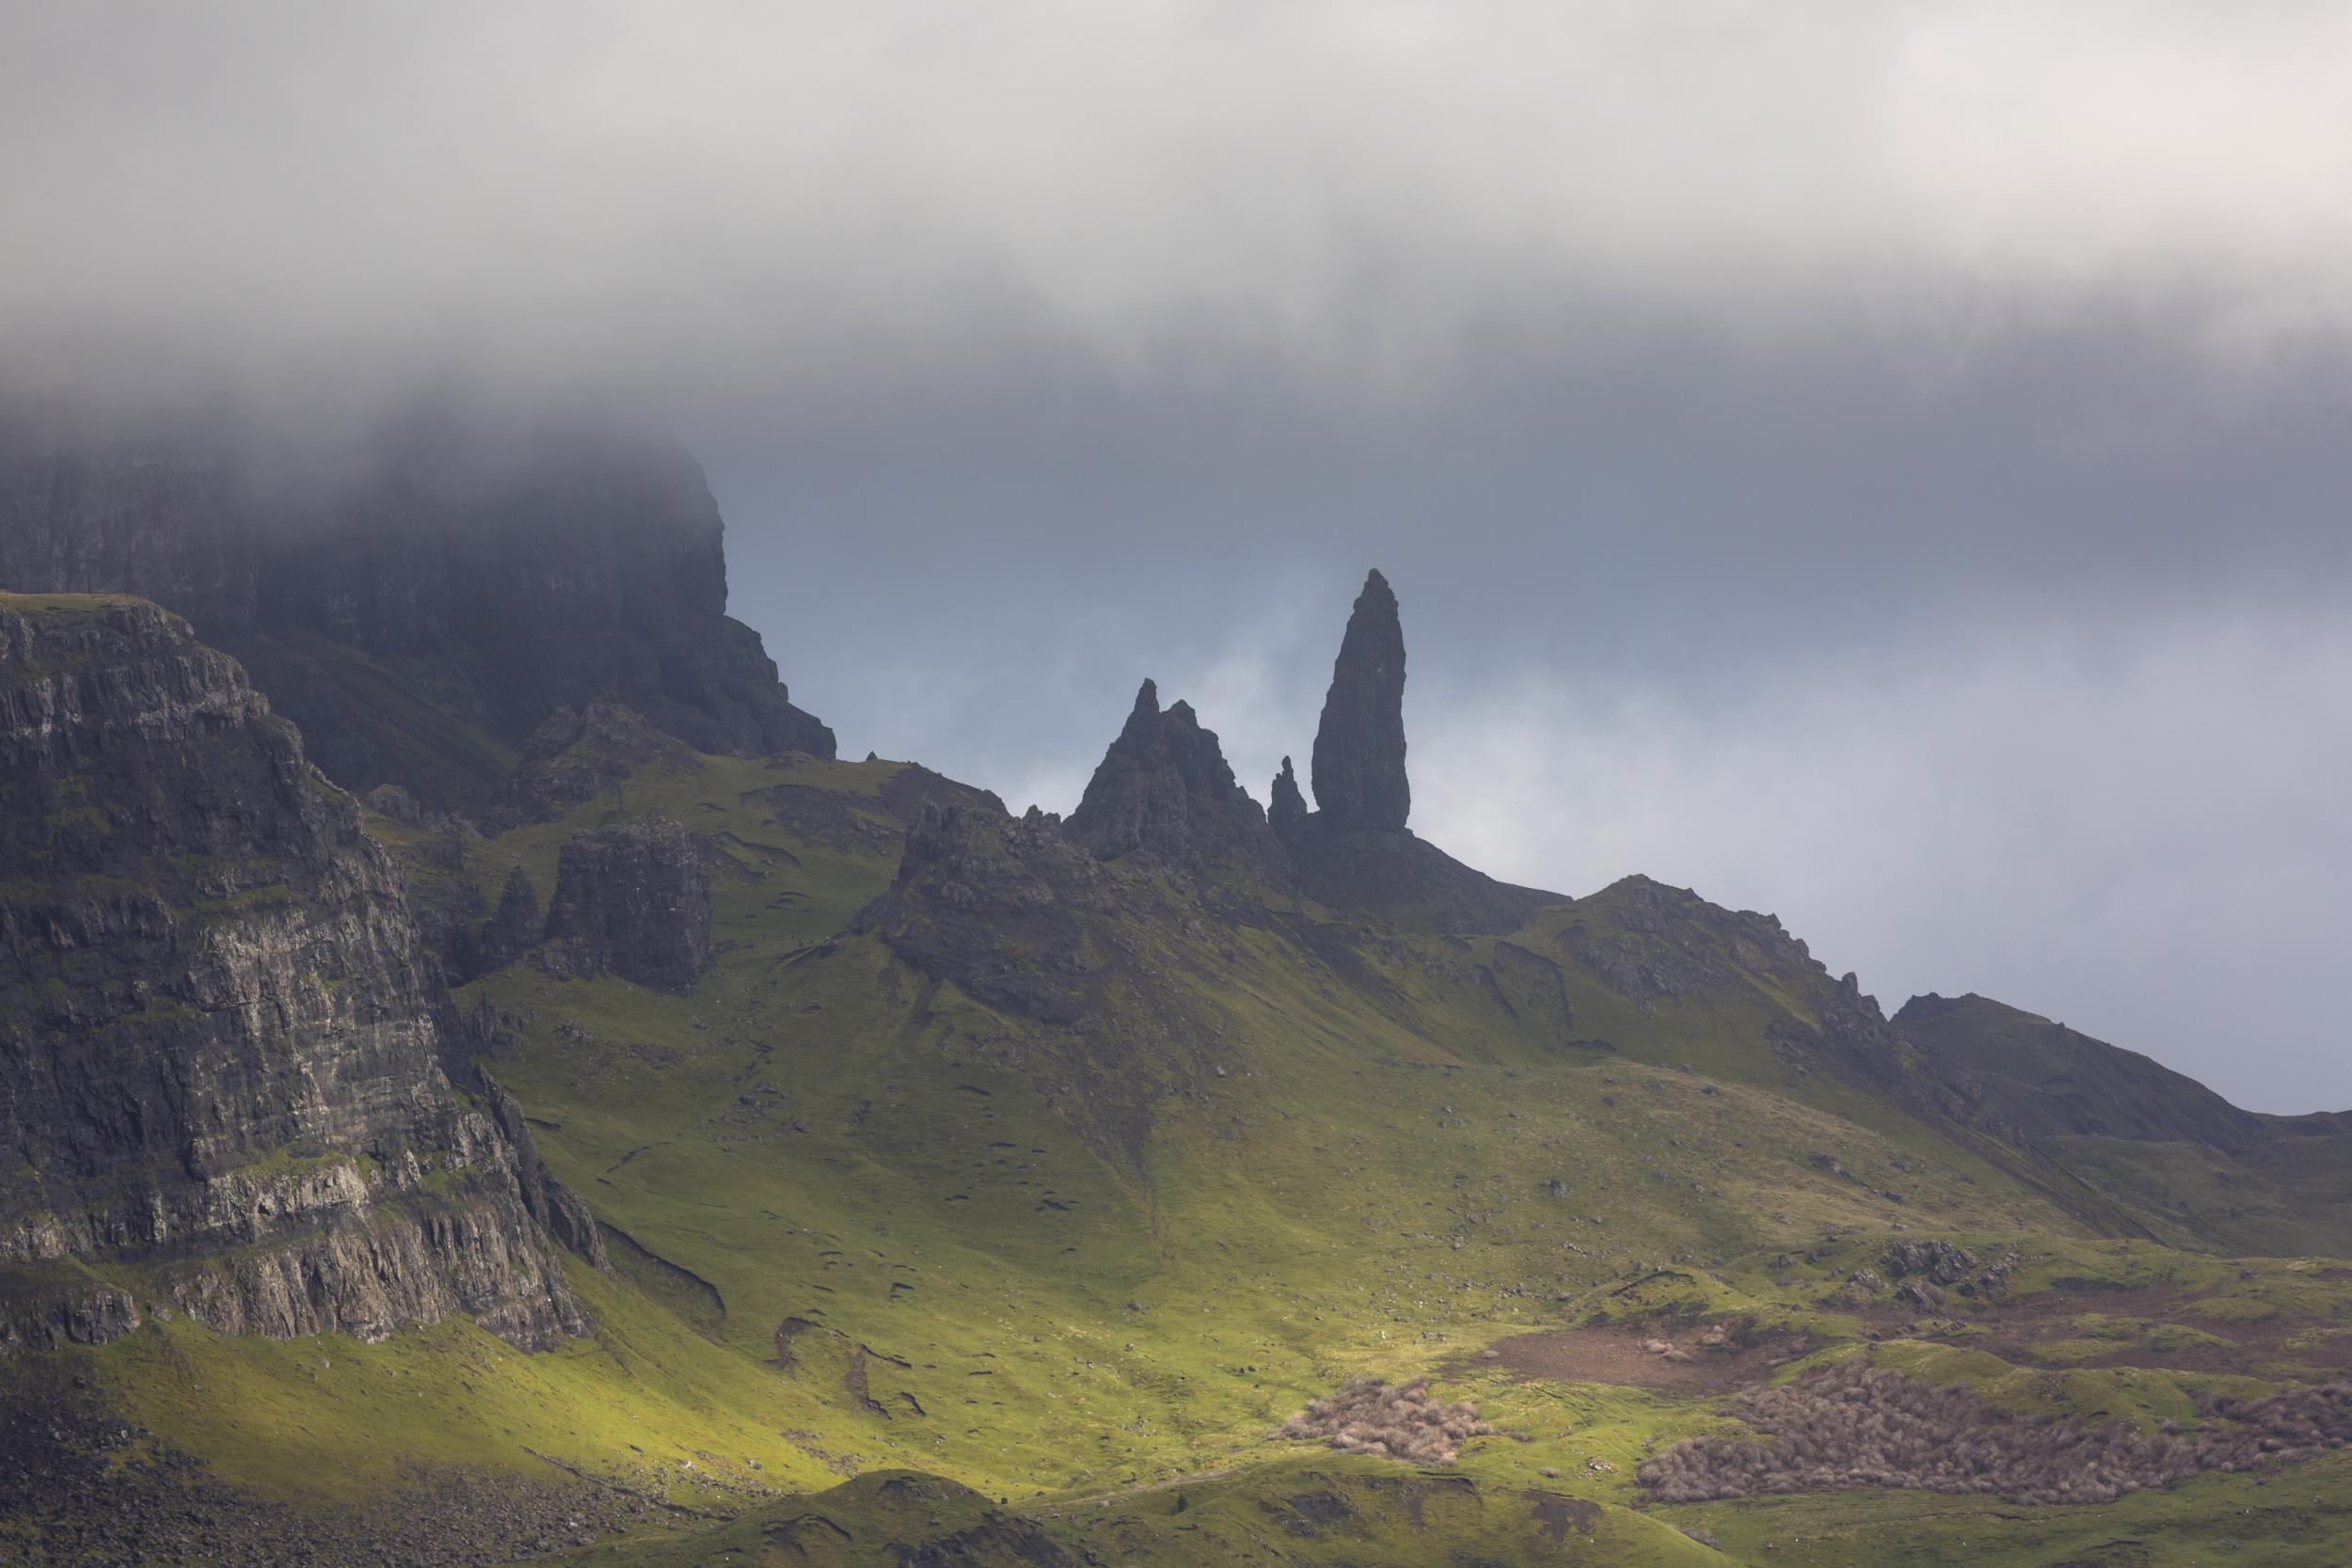 Pay a visit to the Old Man of Storr